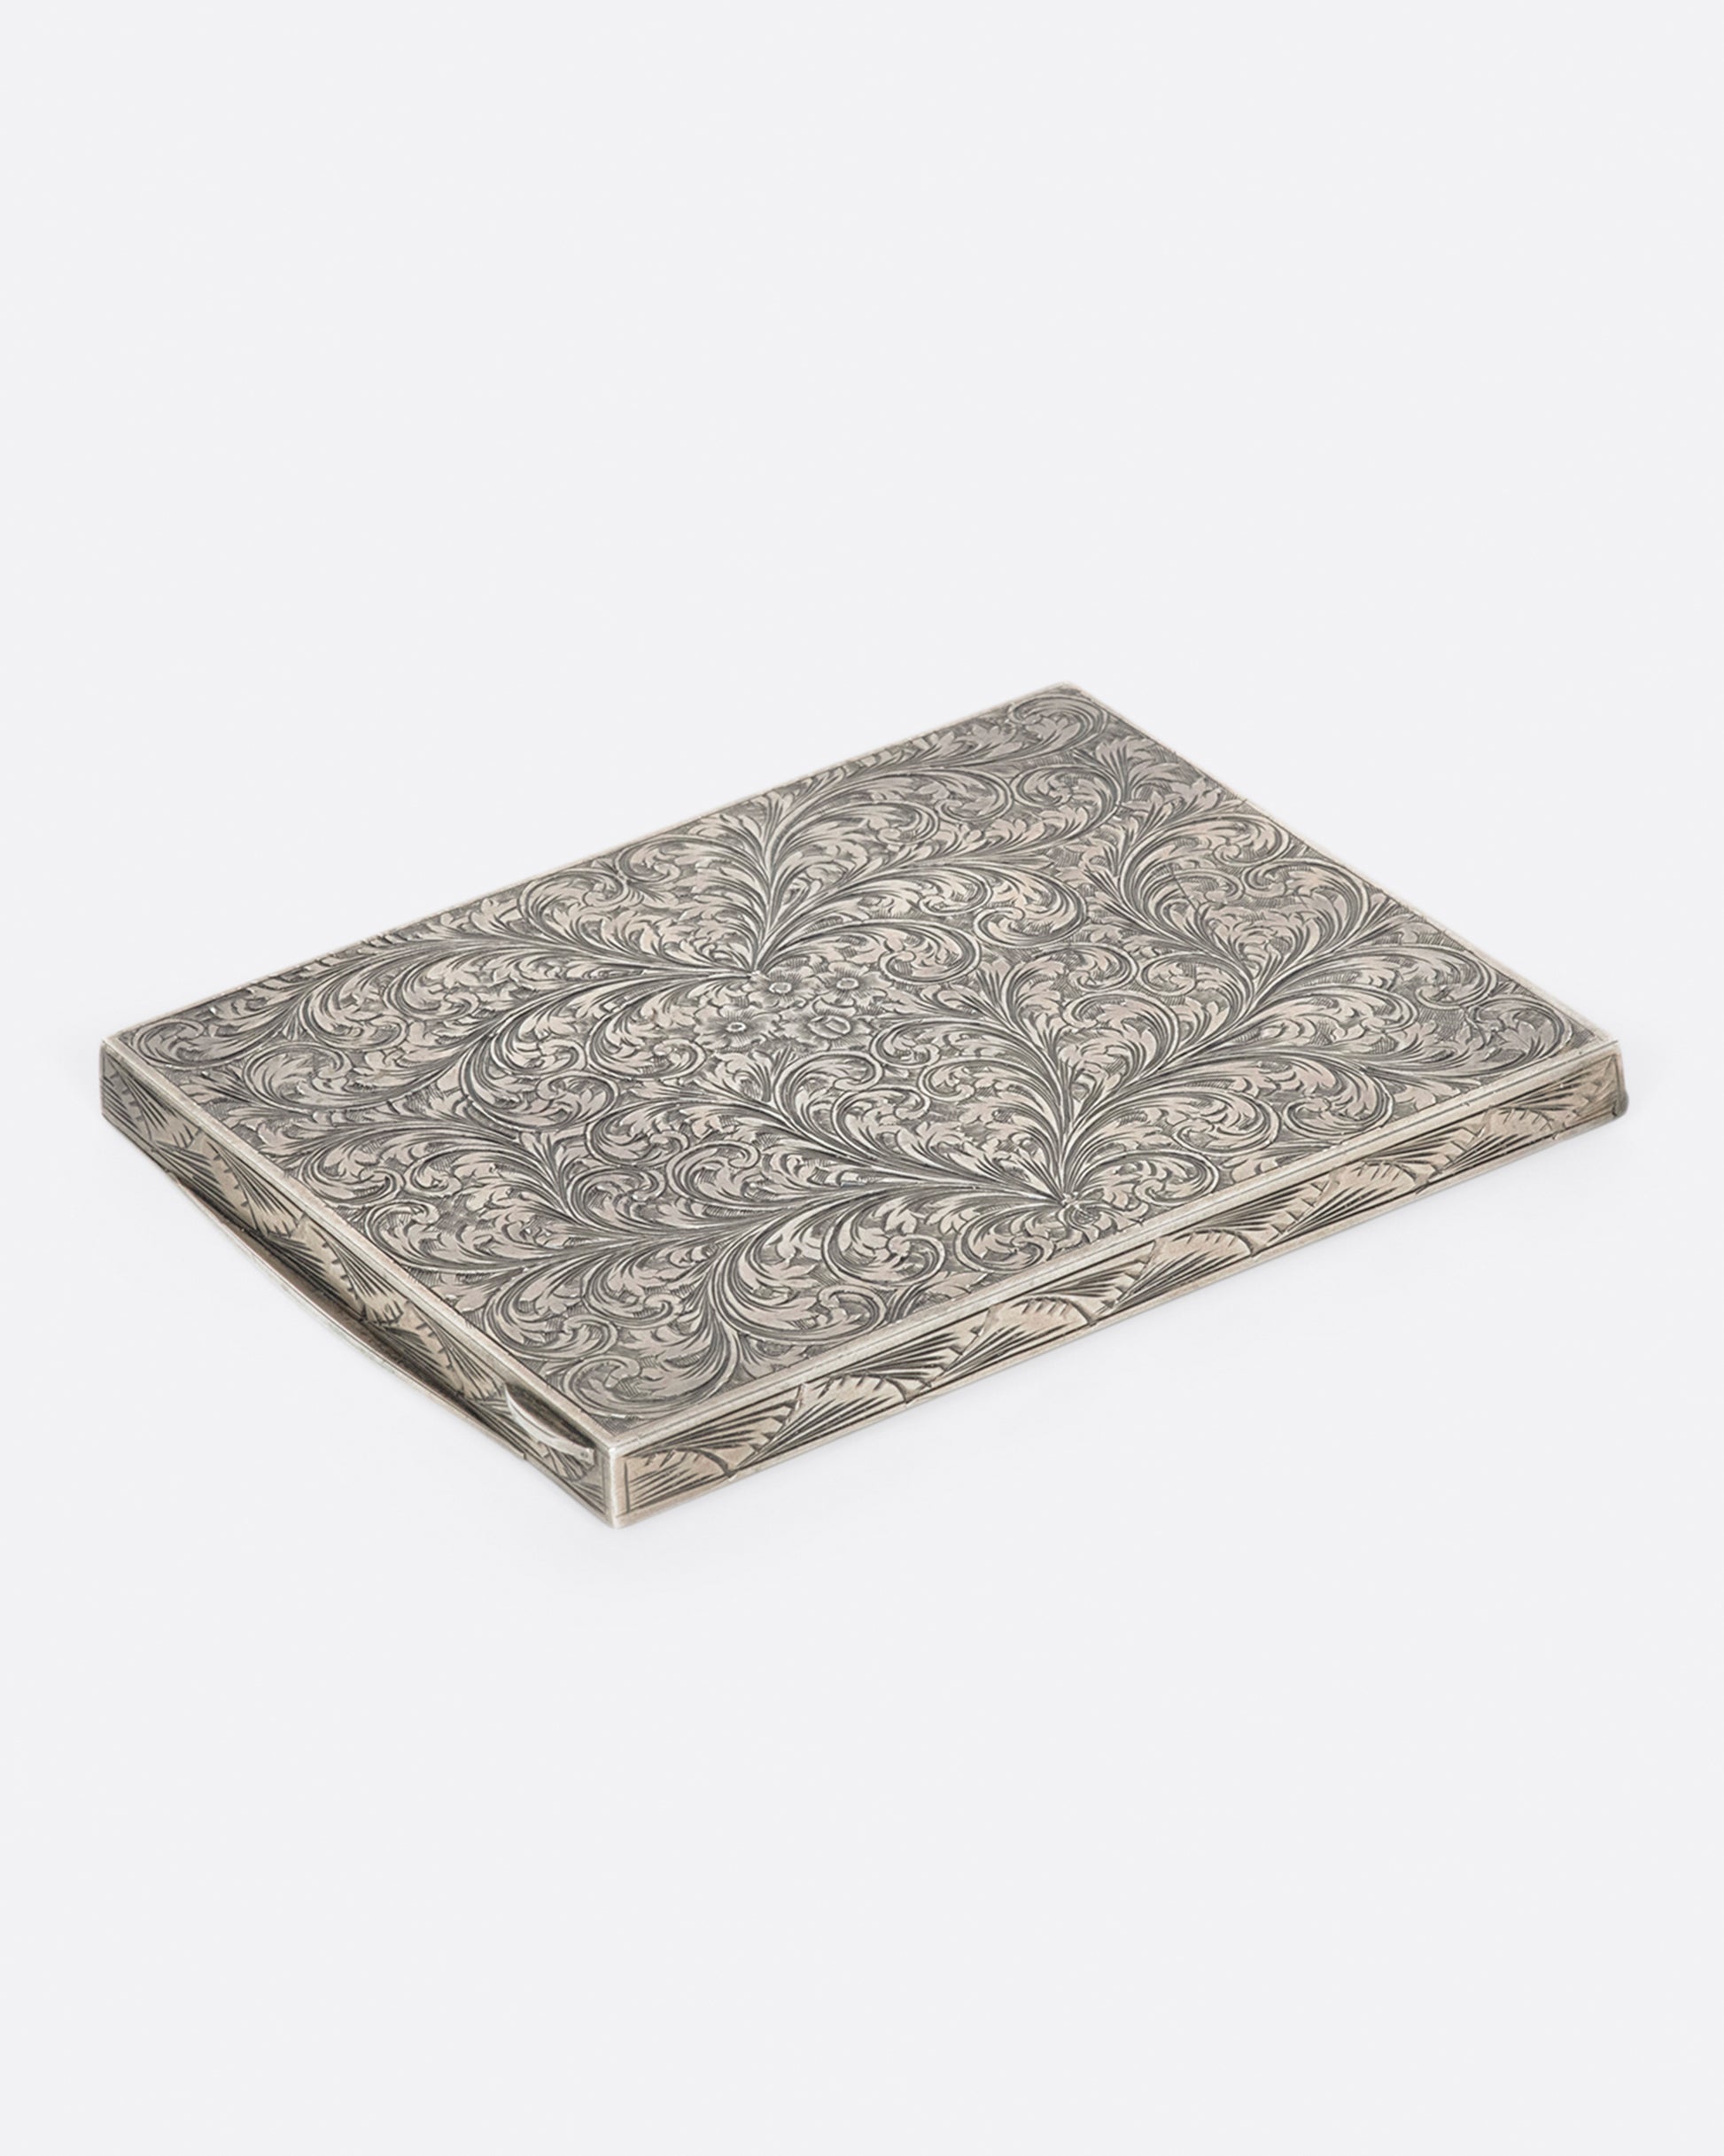 This slim, floral box is perfect for stashing joints, cigarettes, credit cards; you name it.